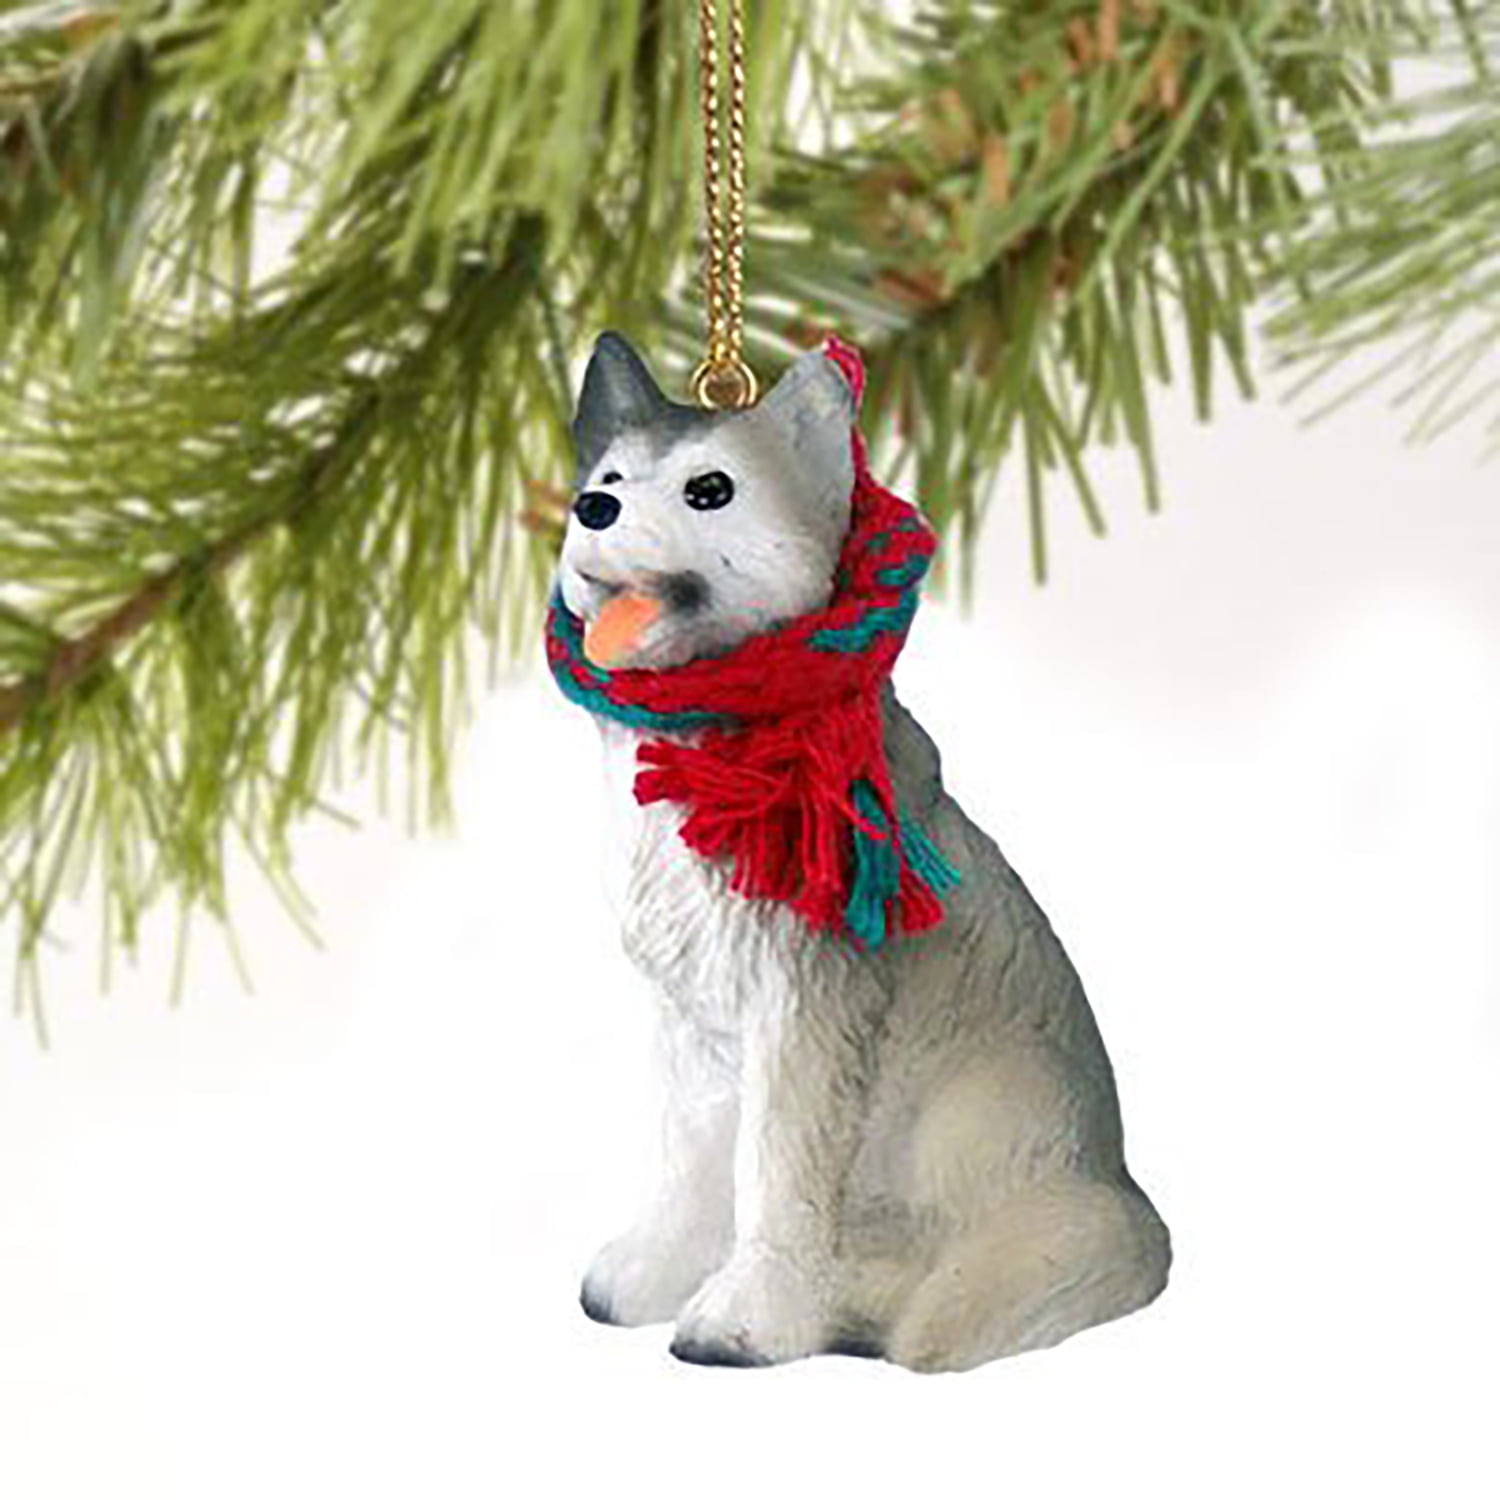 Conversation Concepts Siberian Husky Red and White with Blue Eyes Ornament 